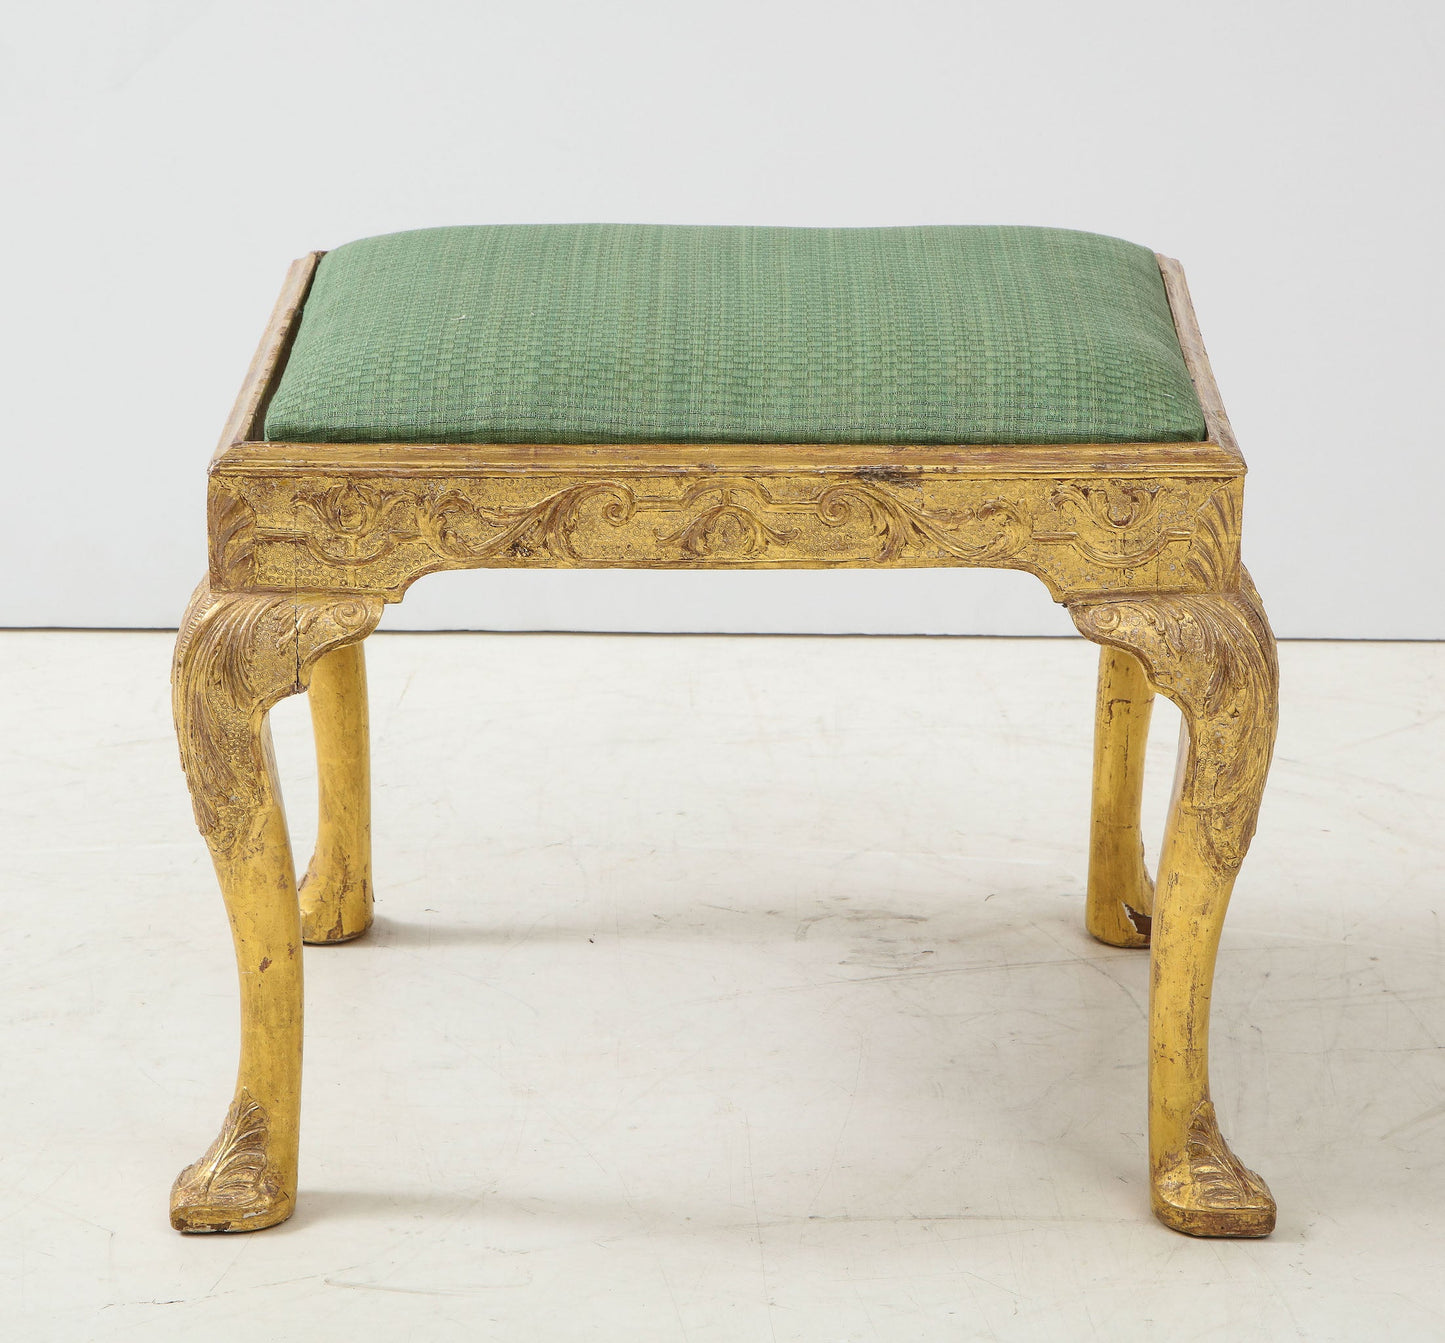 Carved-Gesso-Stool-with-Drop-In-Seat-(C-1740)-11